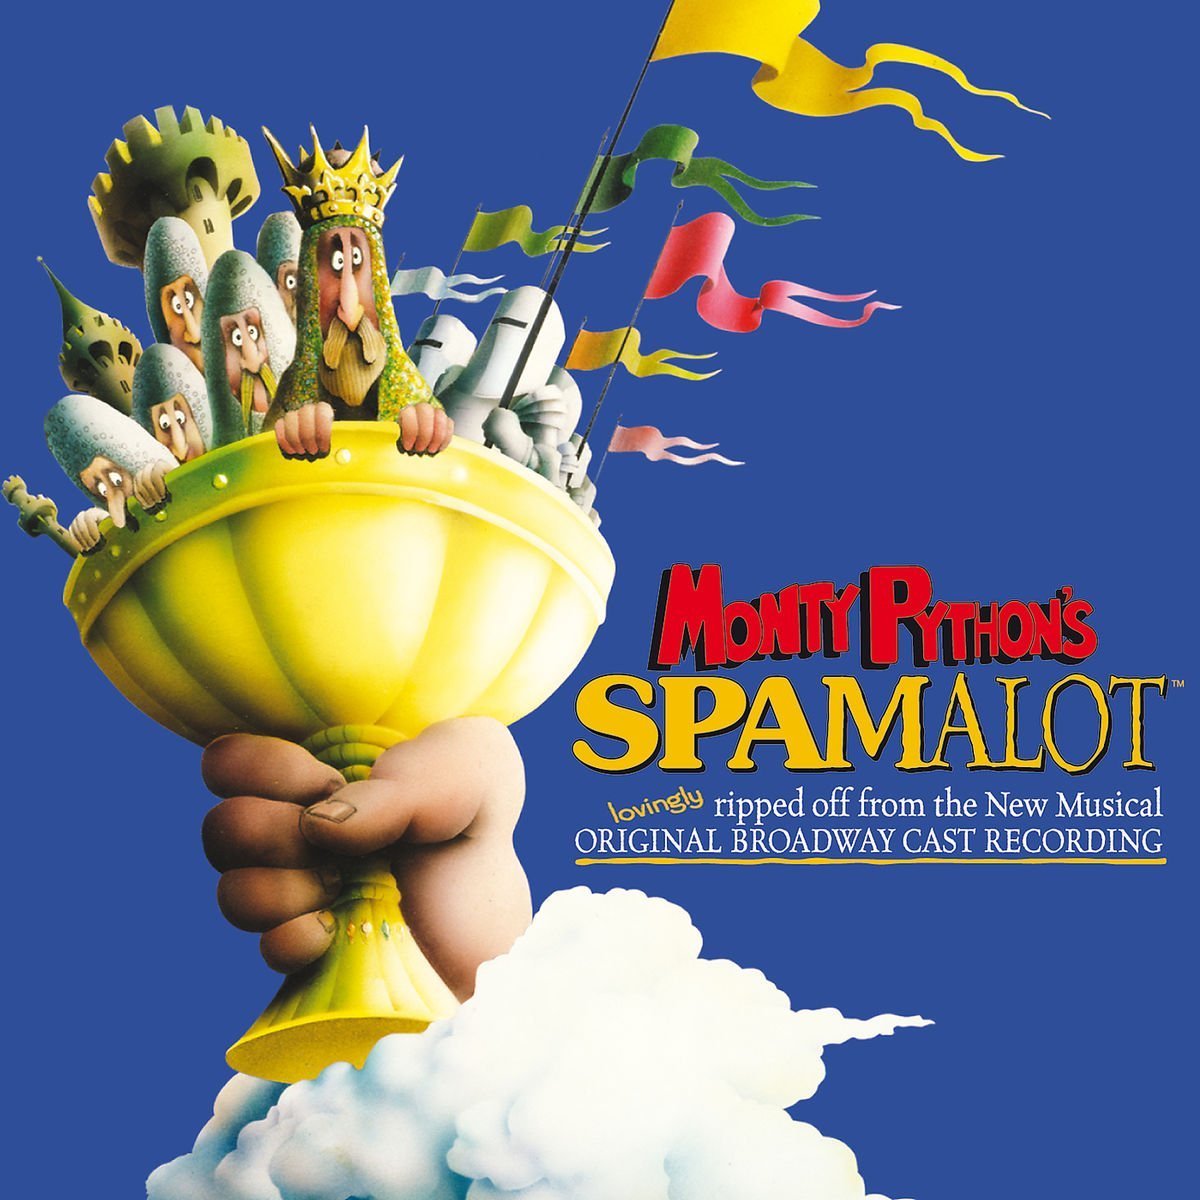 MONTY PYTHON'S SPAMALOT Comes To Pier One Theatre from Today 